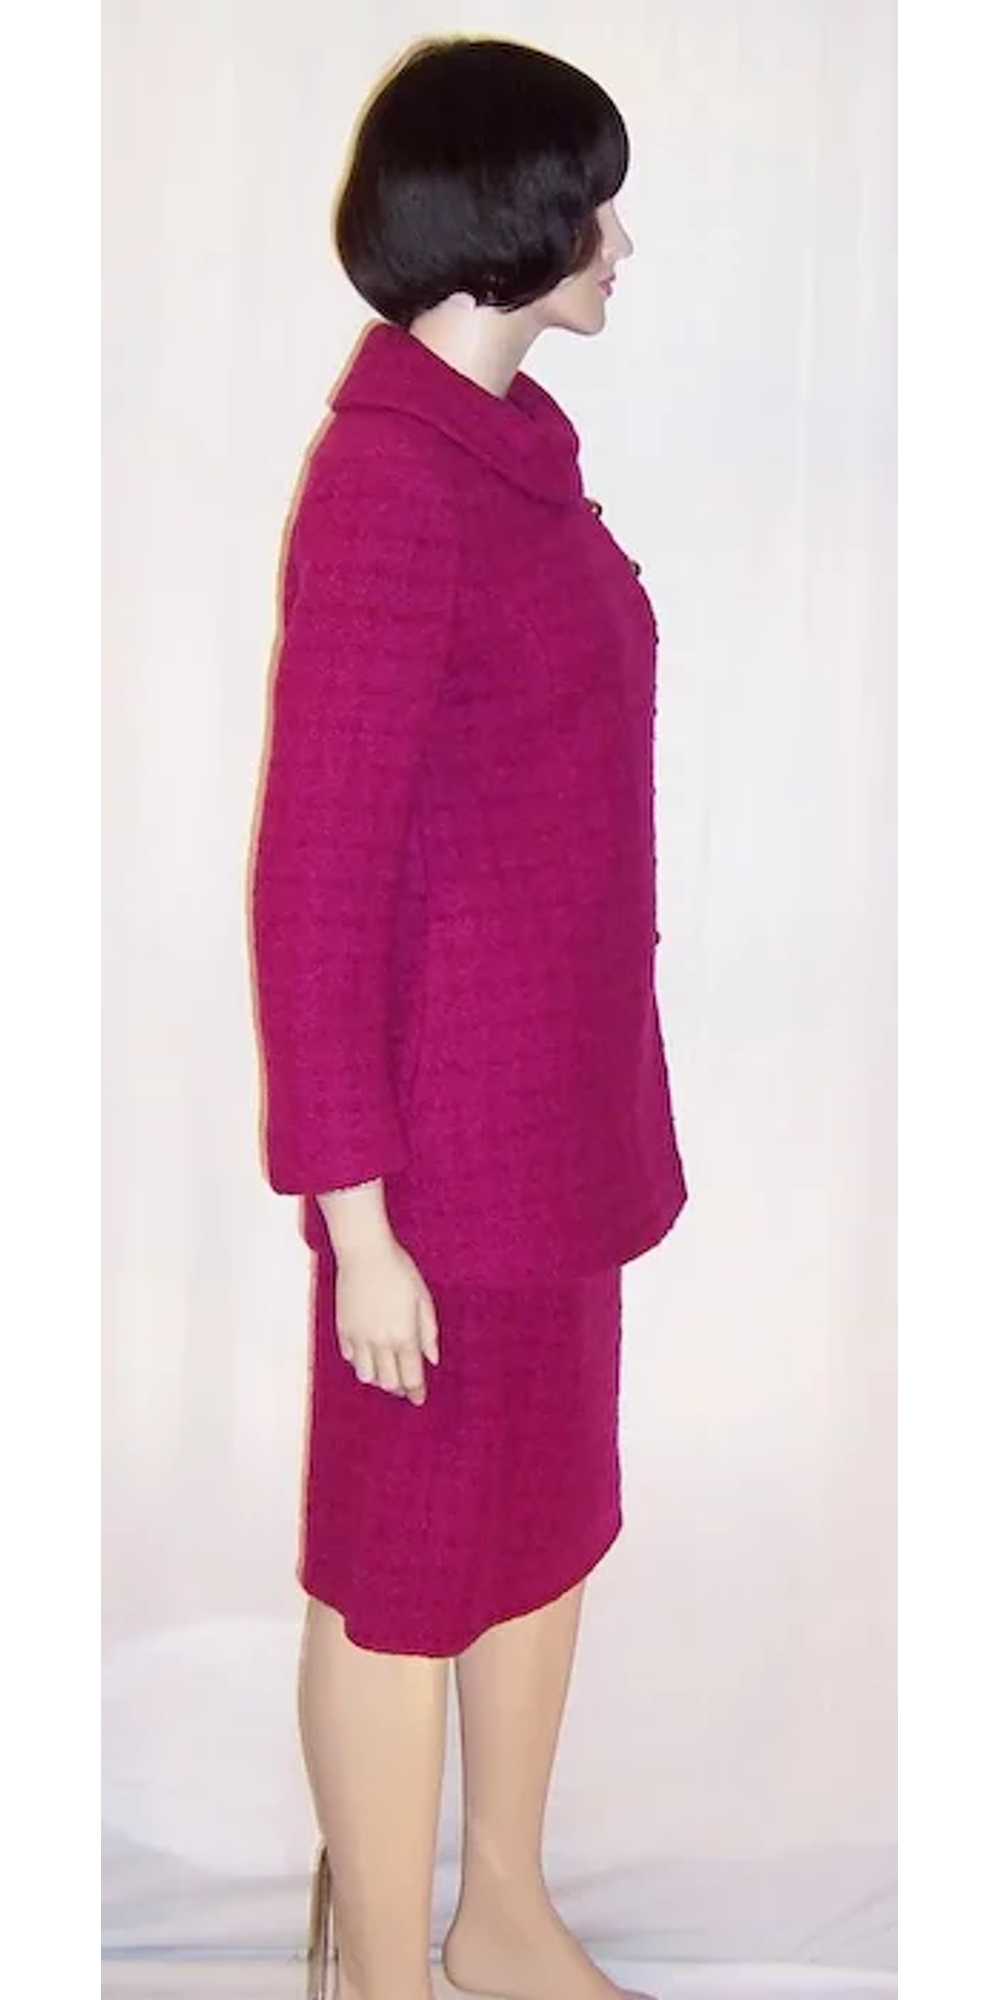 Stylish & Gorgeous Red Raspberry Nubby Woolen Suit - image 4